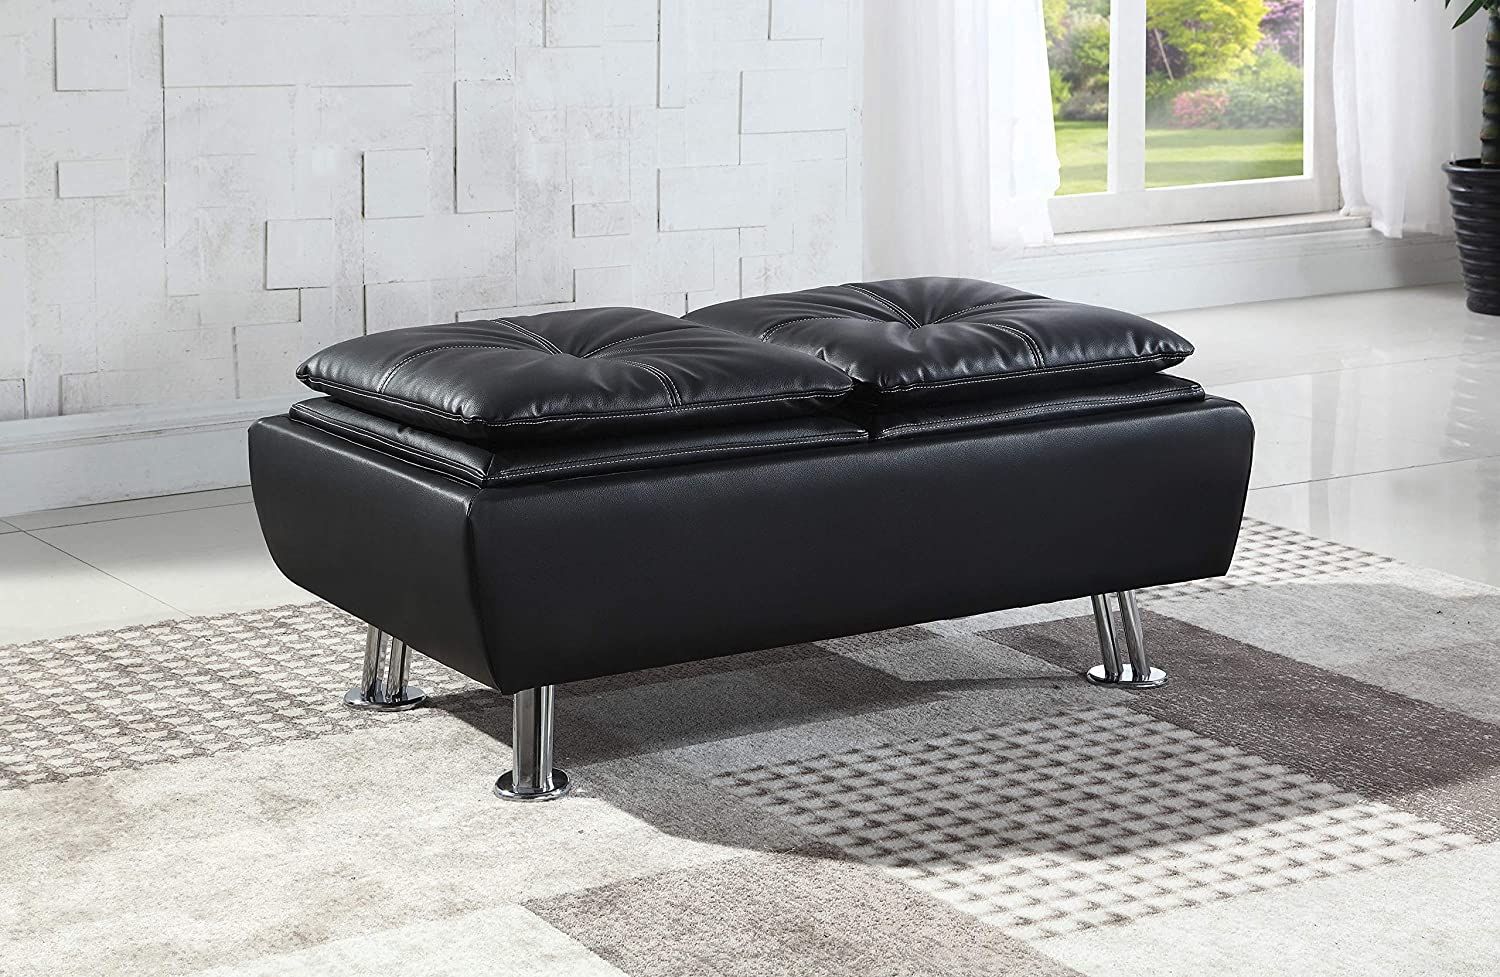 Rafael Faux Leather Storage Ottoman With Reversible Tray Tops Black,  7445043665640 | Ebay Inside Black Leather Wrapped Ottomans (View 8 of 15)